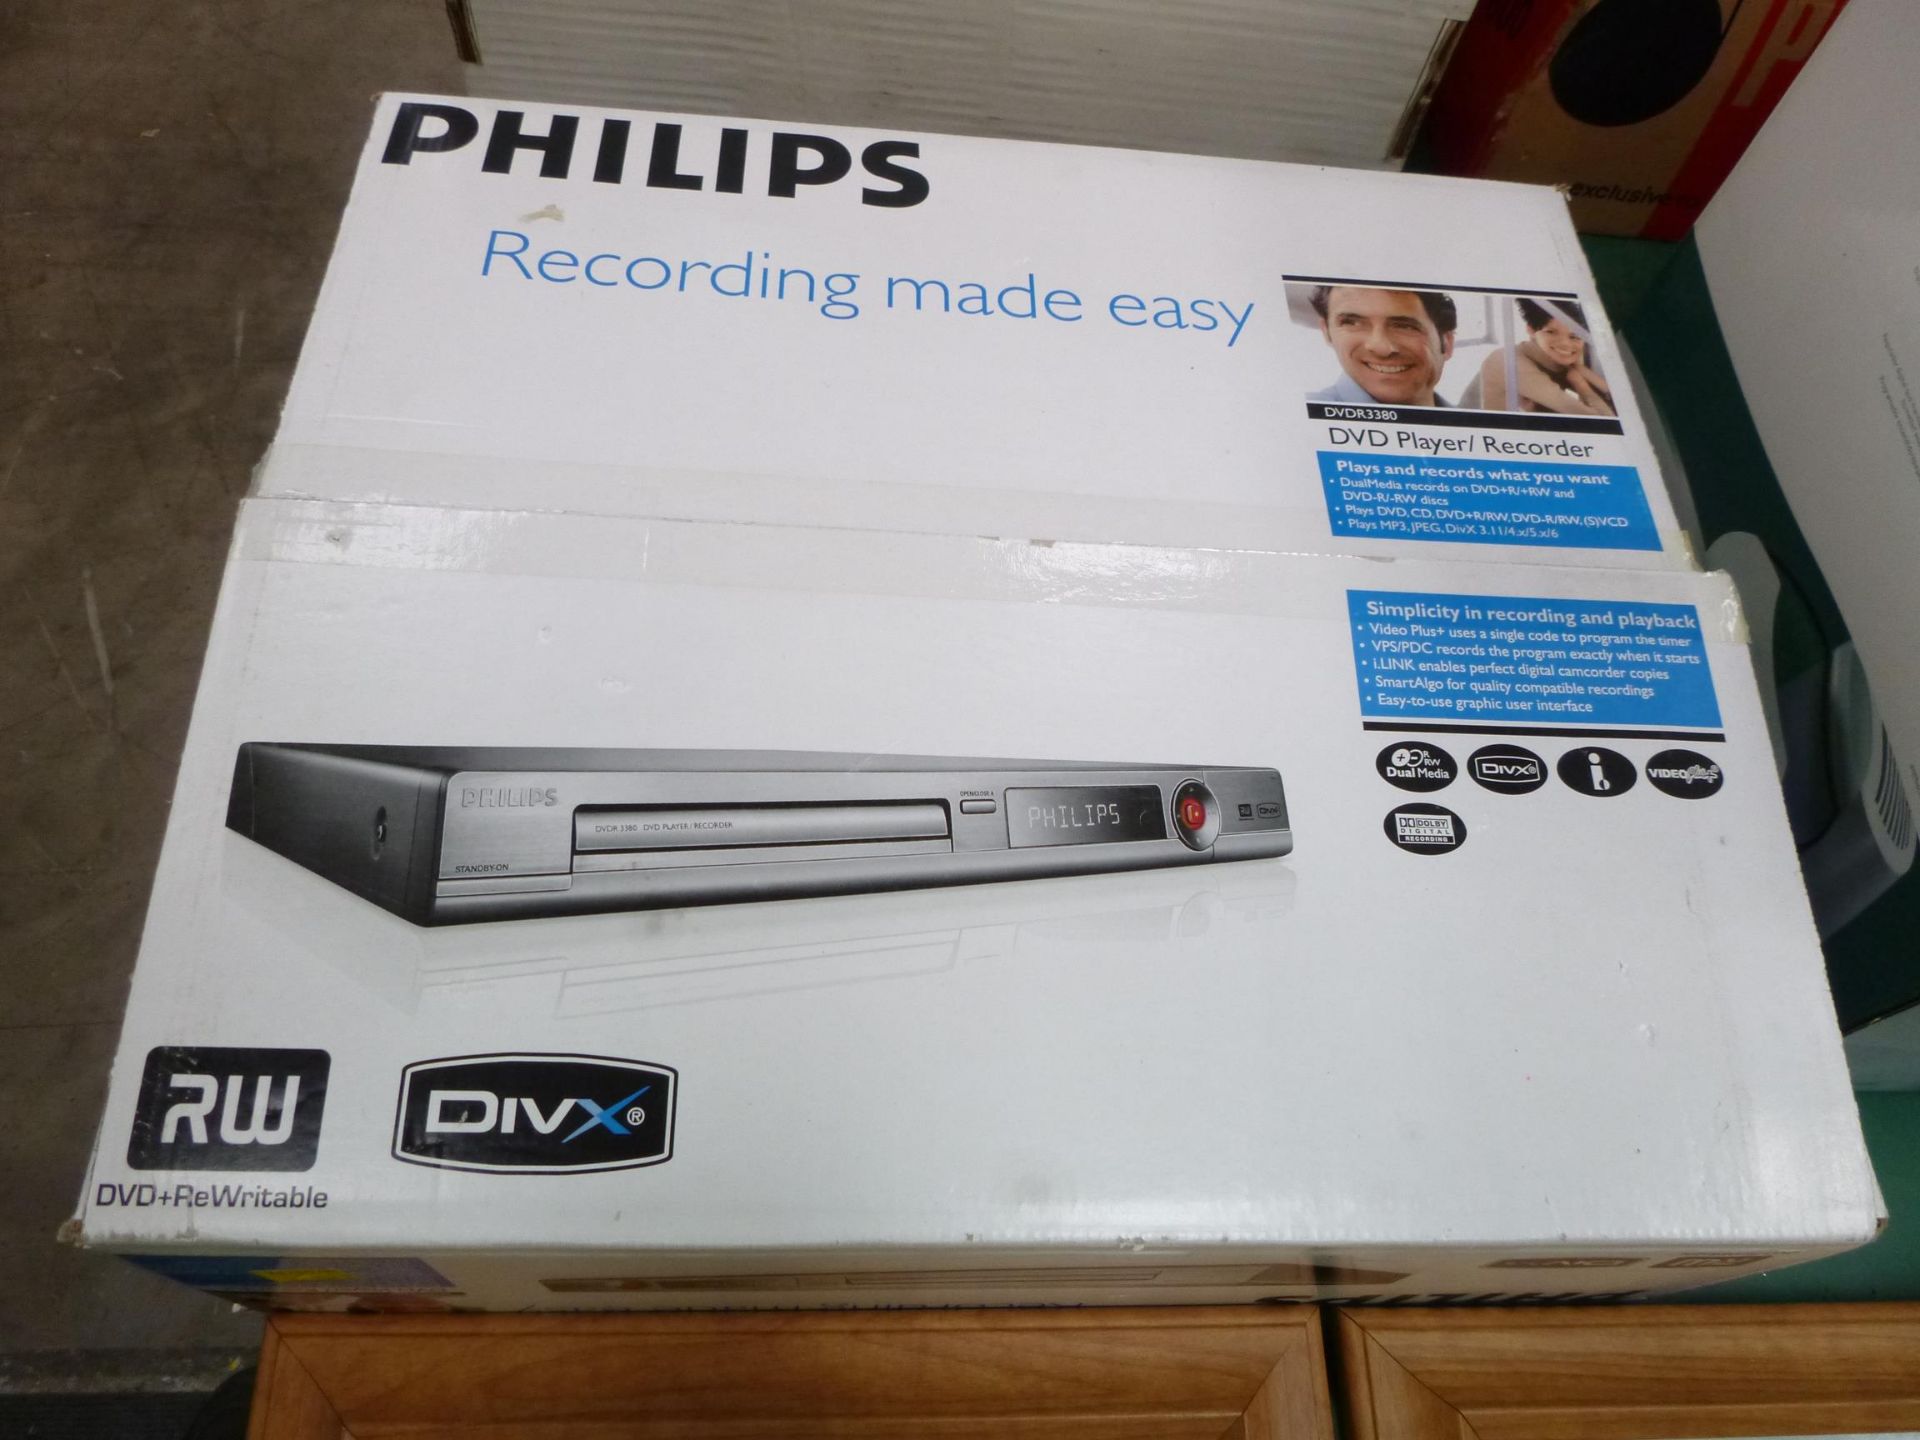 A Philips DVDR3380 DVD Player/Recorder (in box) along with a Bionaire Digital Warm Mist Dehumidifier - Image 2 of 3